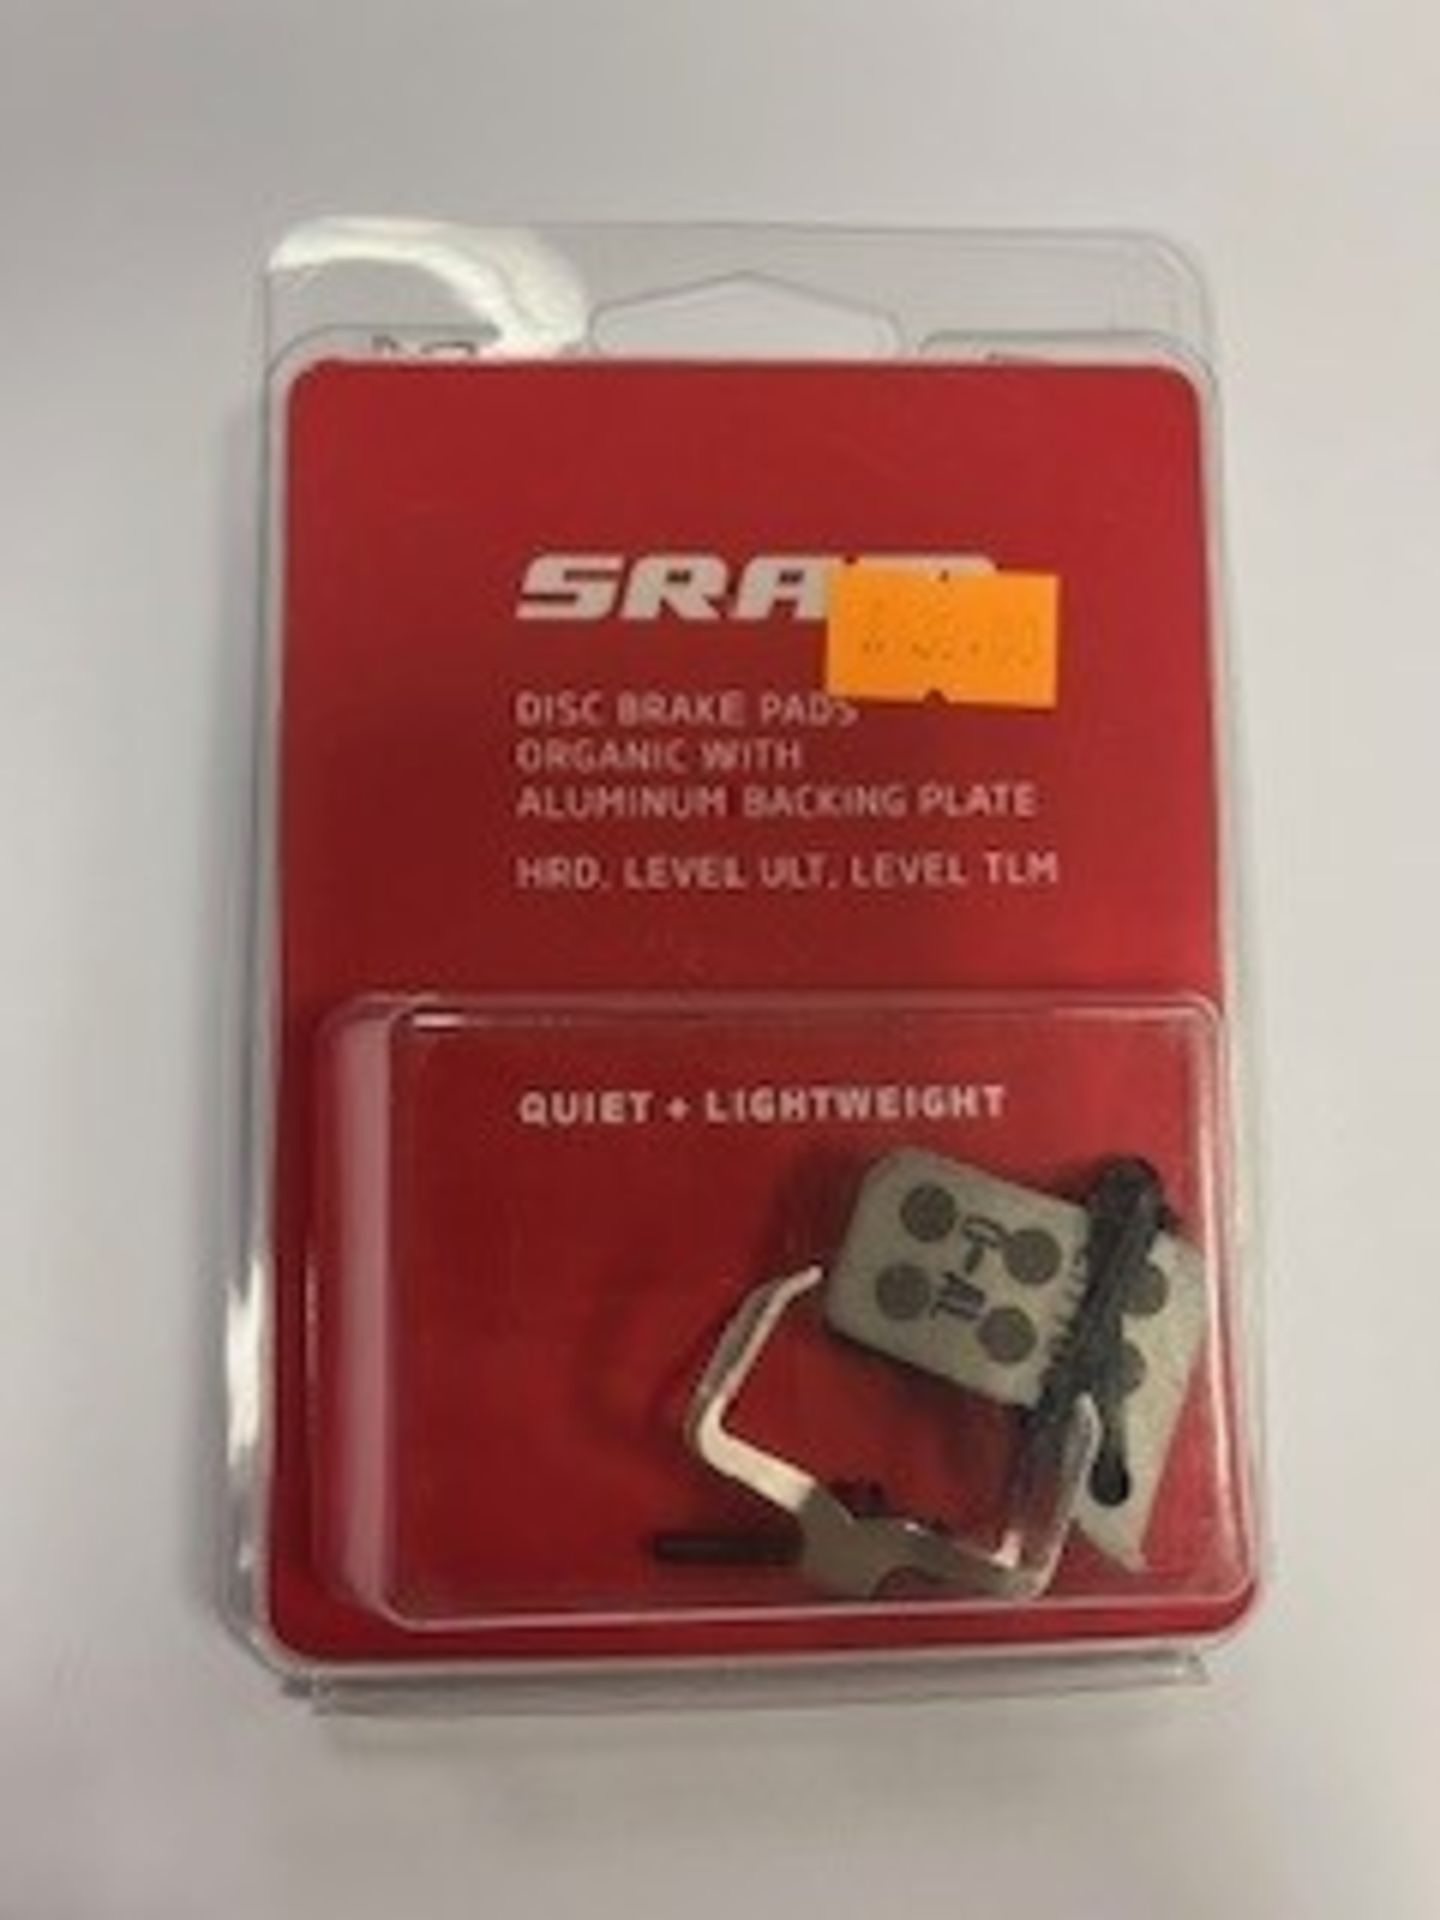 Sram Brake Pads to include 5x Disc Brake Pads Organic with Steel Backing Plate (HRD, LEVEL ULT, LEVE - Bild 5 aus 9